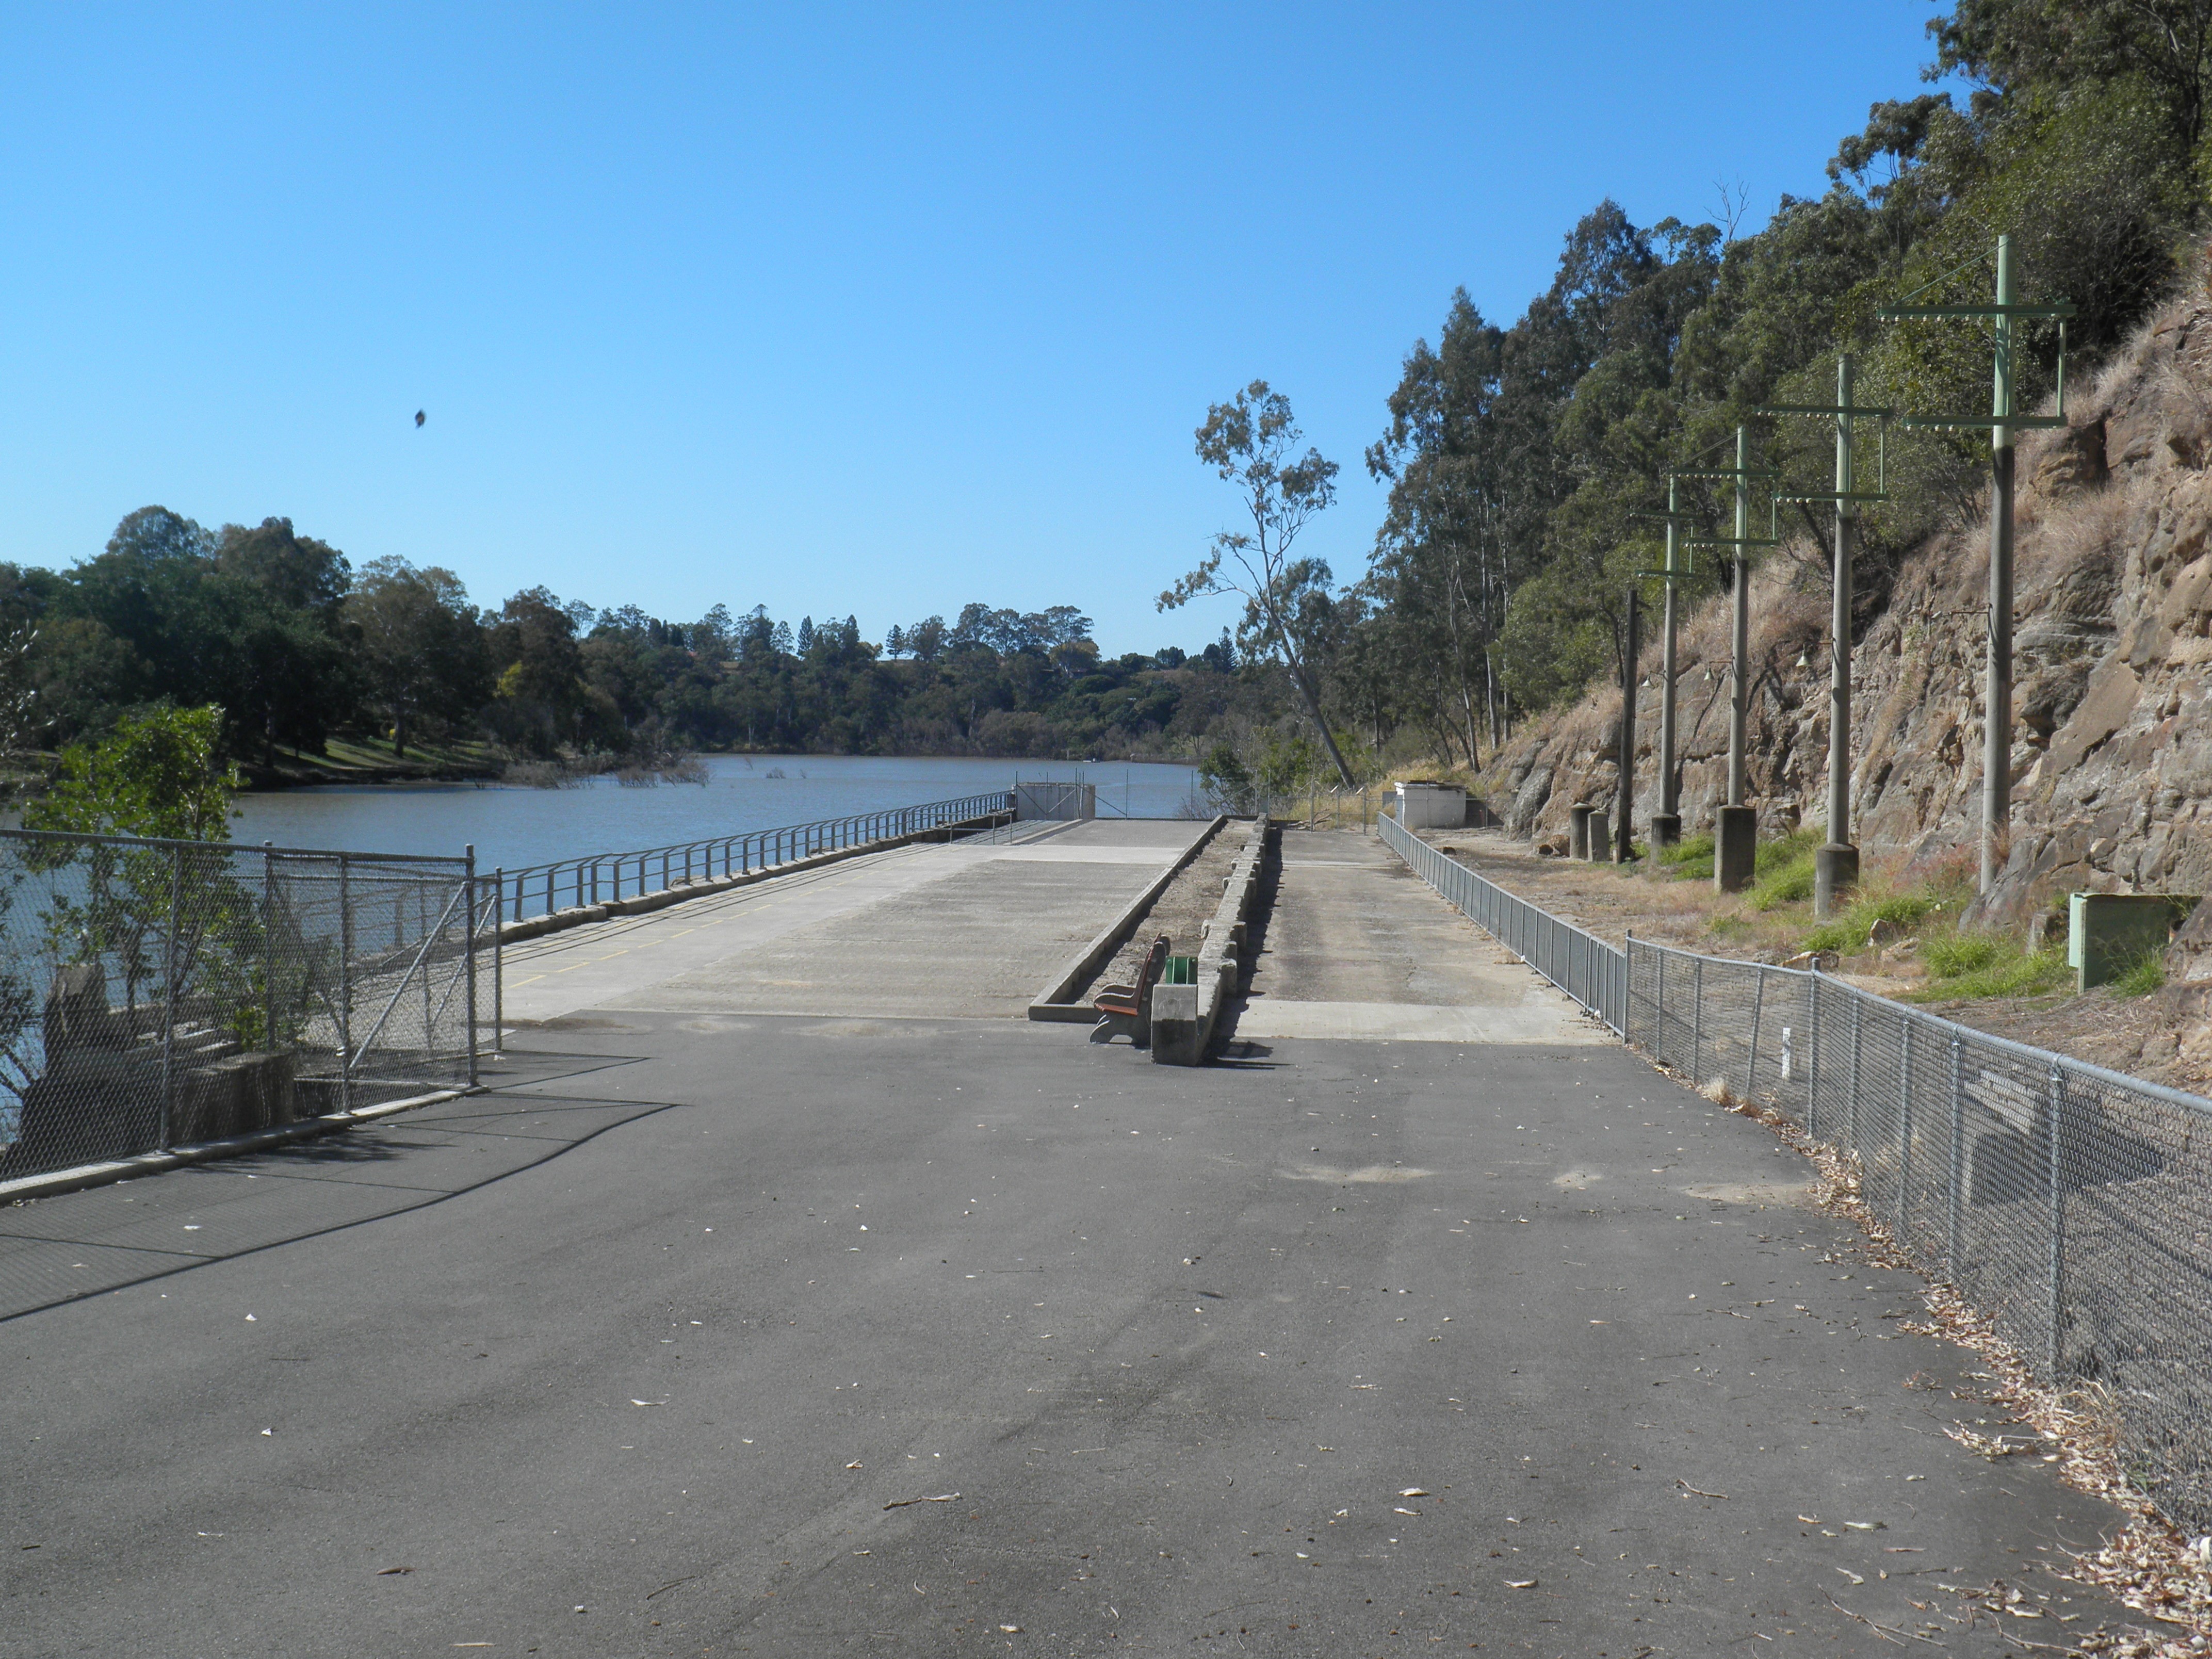 This is an image of the Oxley Wharf Remnants, part of the Queensland Cement and Lime Conveyer Belt and Oxley Wharf Remnants (Local Heritage Place)